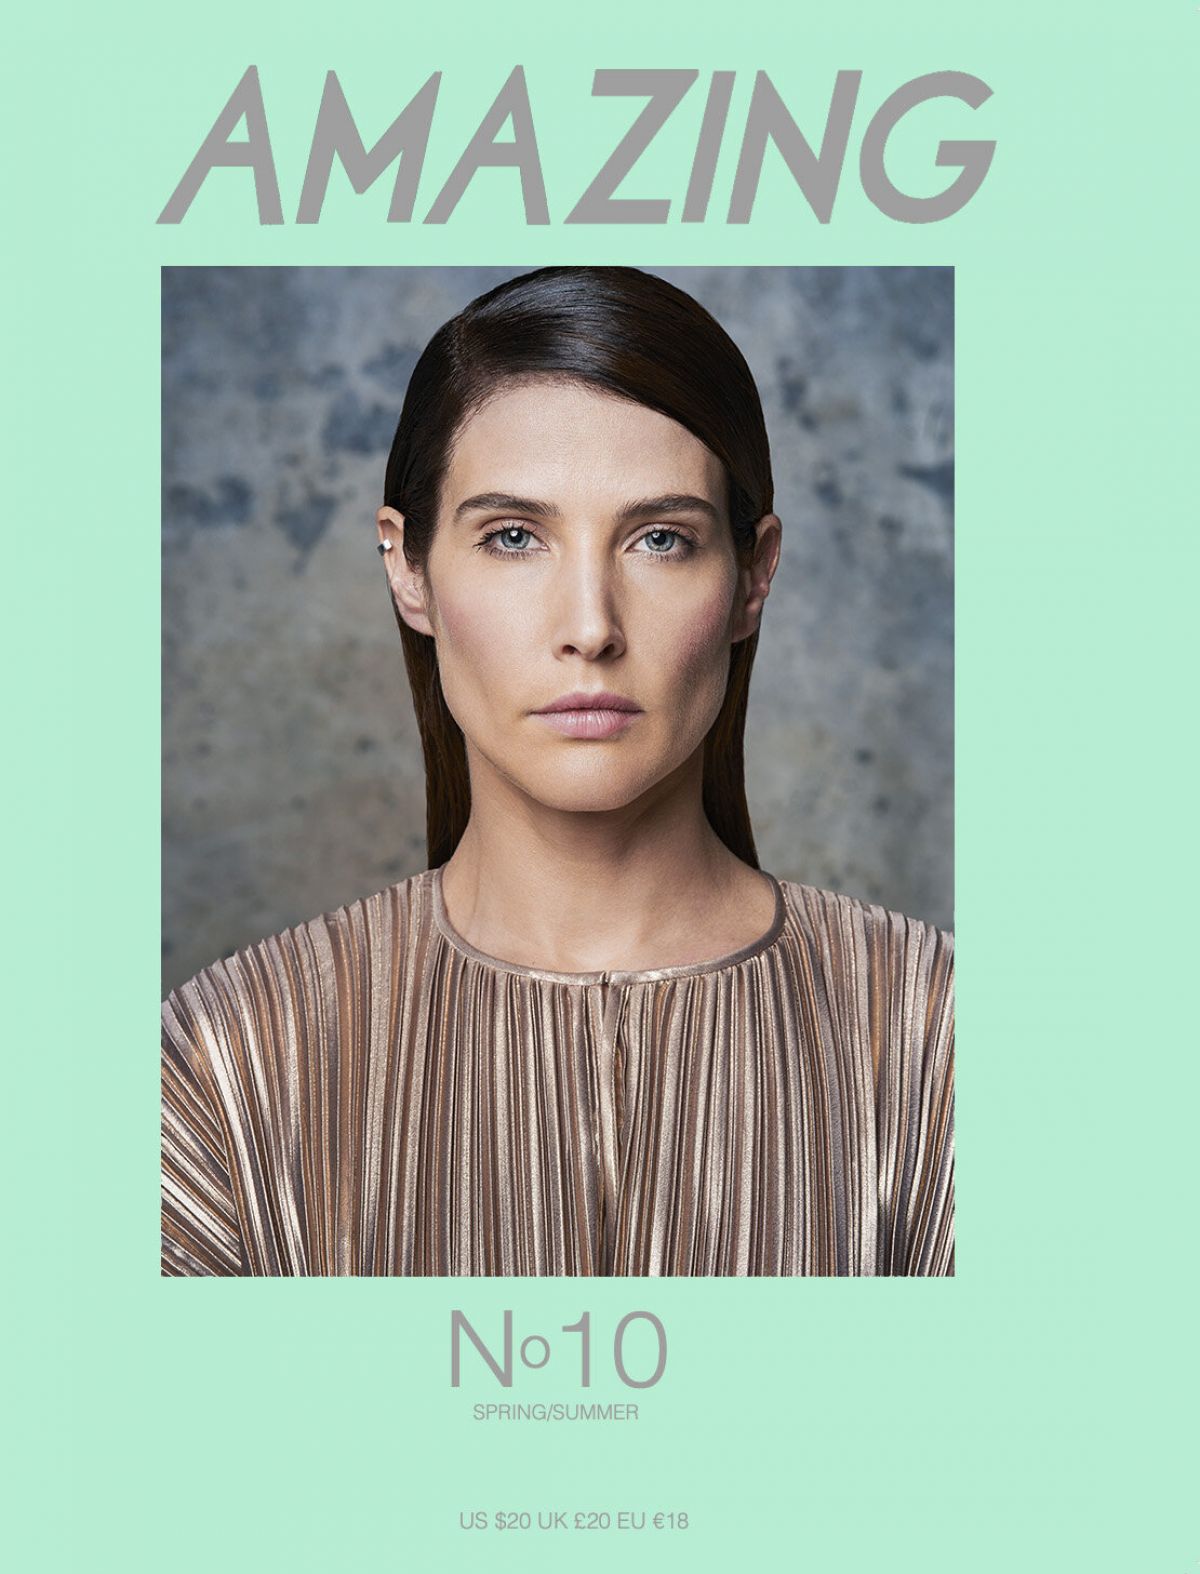 cobie-smulders-for-amazing-no-10-magazine-spring-summer2020-picture-pub-5.jpg